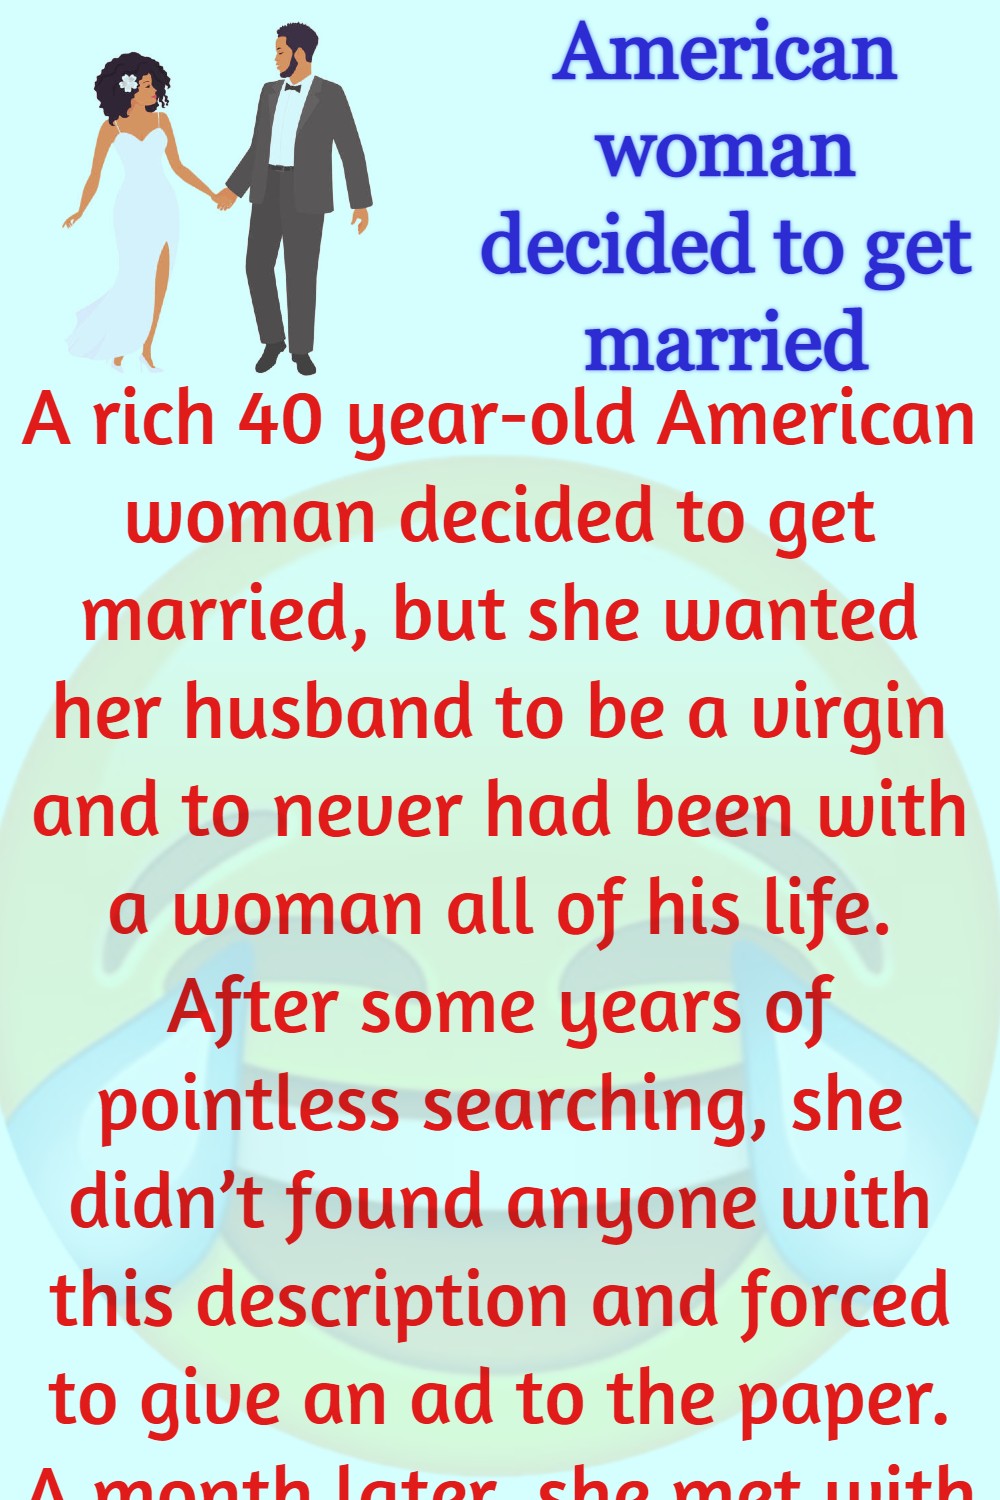 American woman decided to get married